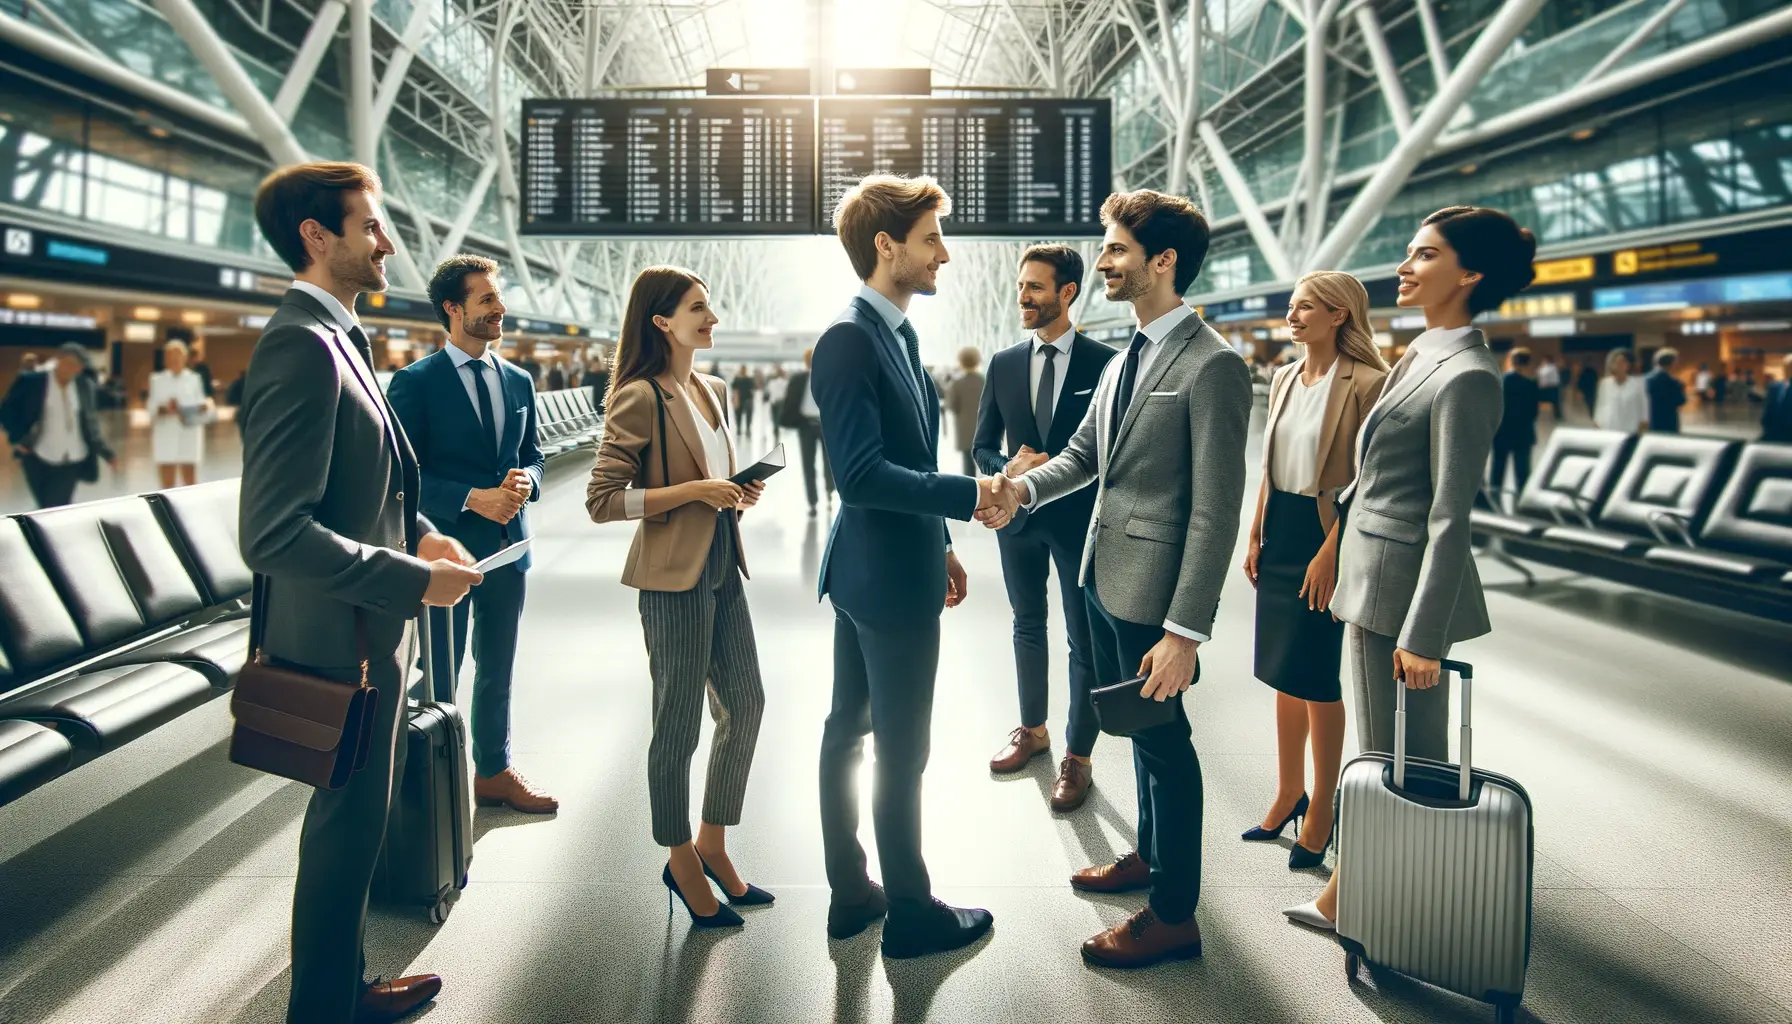 Corporate travel management - Business professionals shaking hands at airport